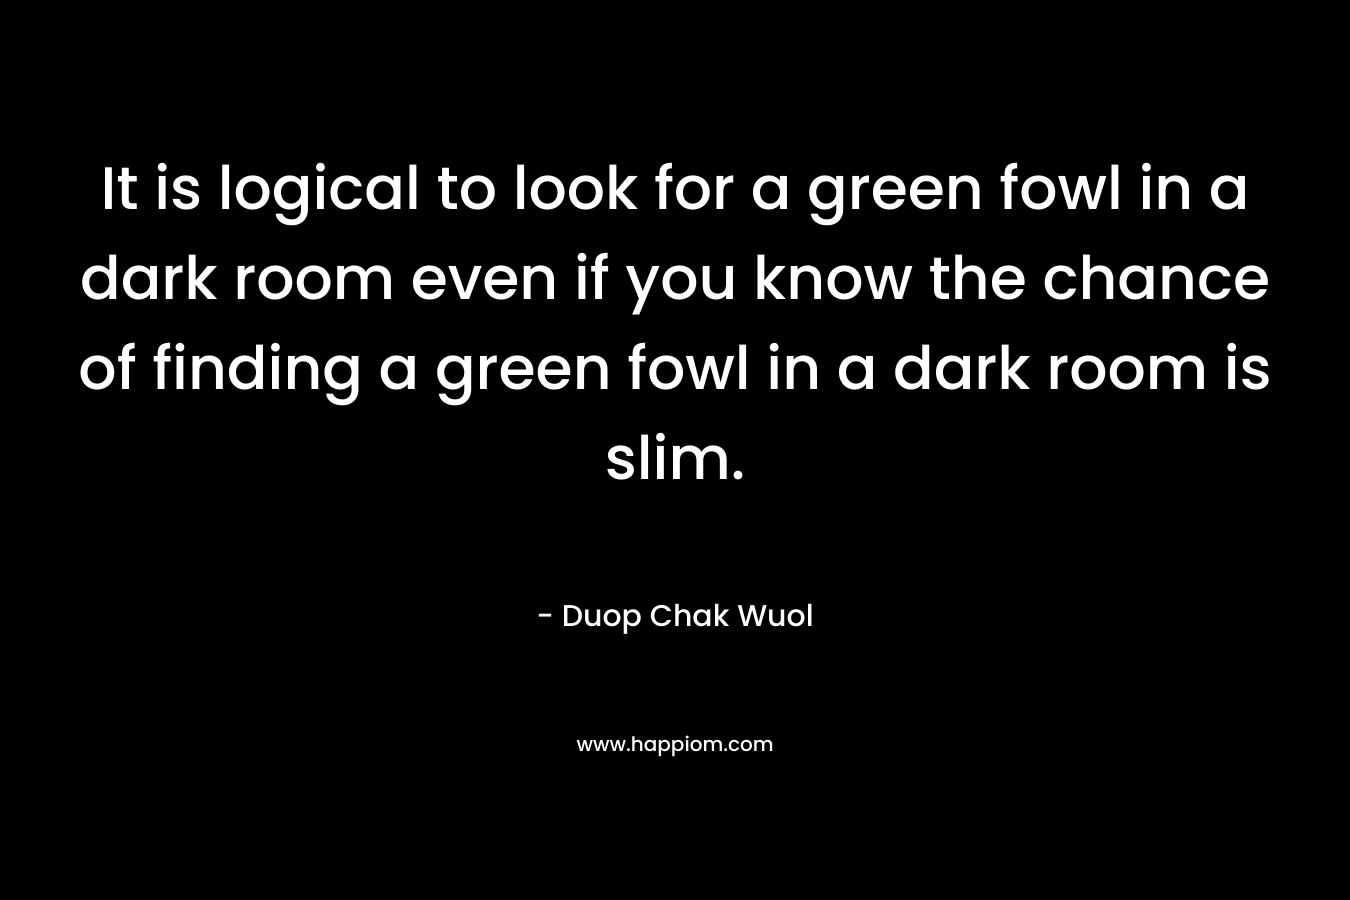 It is logical to look for a green fowl in a dark room even if you know the chance of finding a green fowl in a dark room is slim. – Duop Chak Wuol